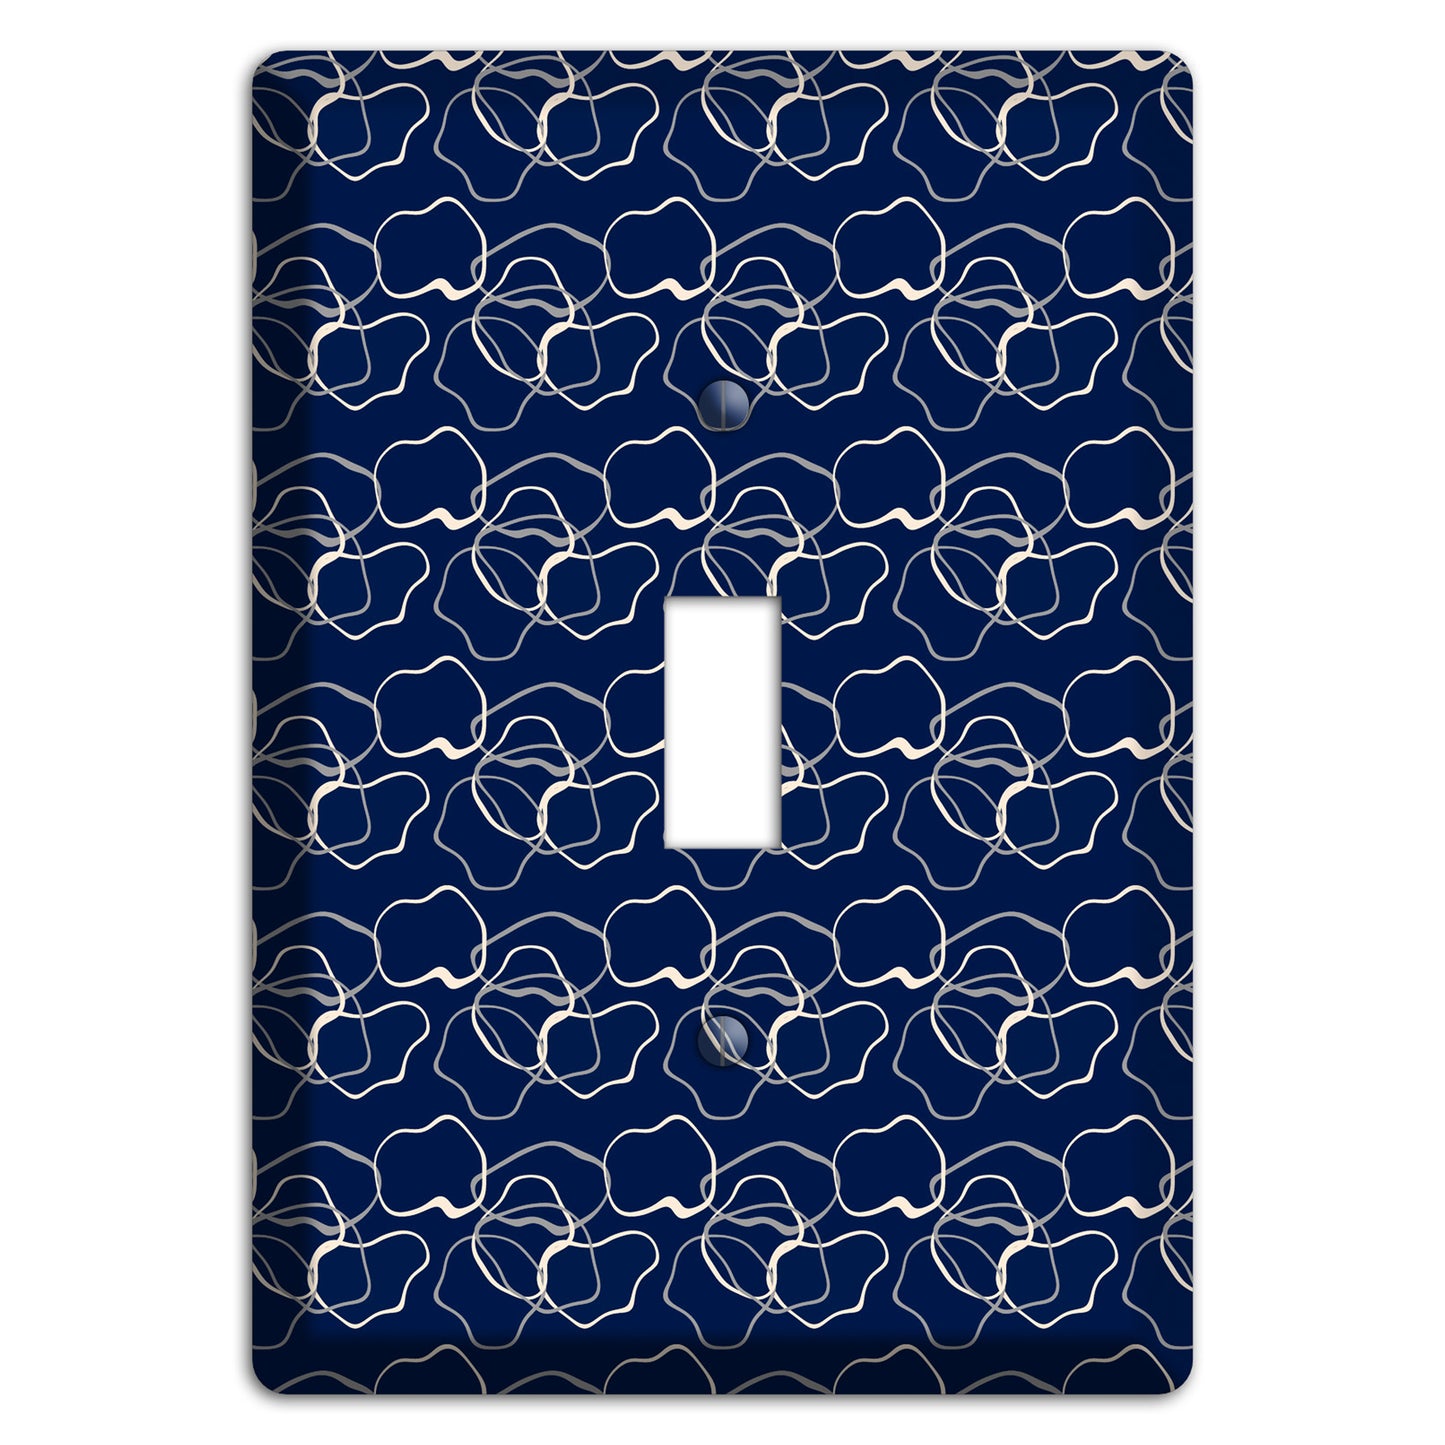 Blue with Irregular Circles Cover Plates